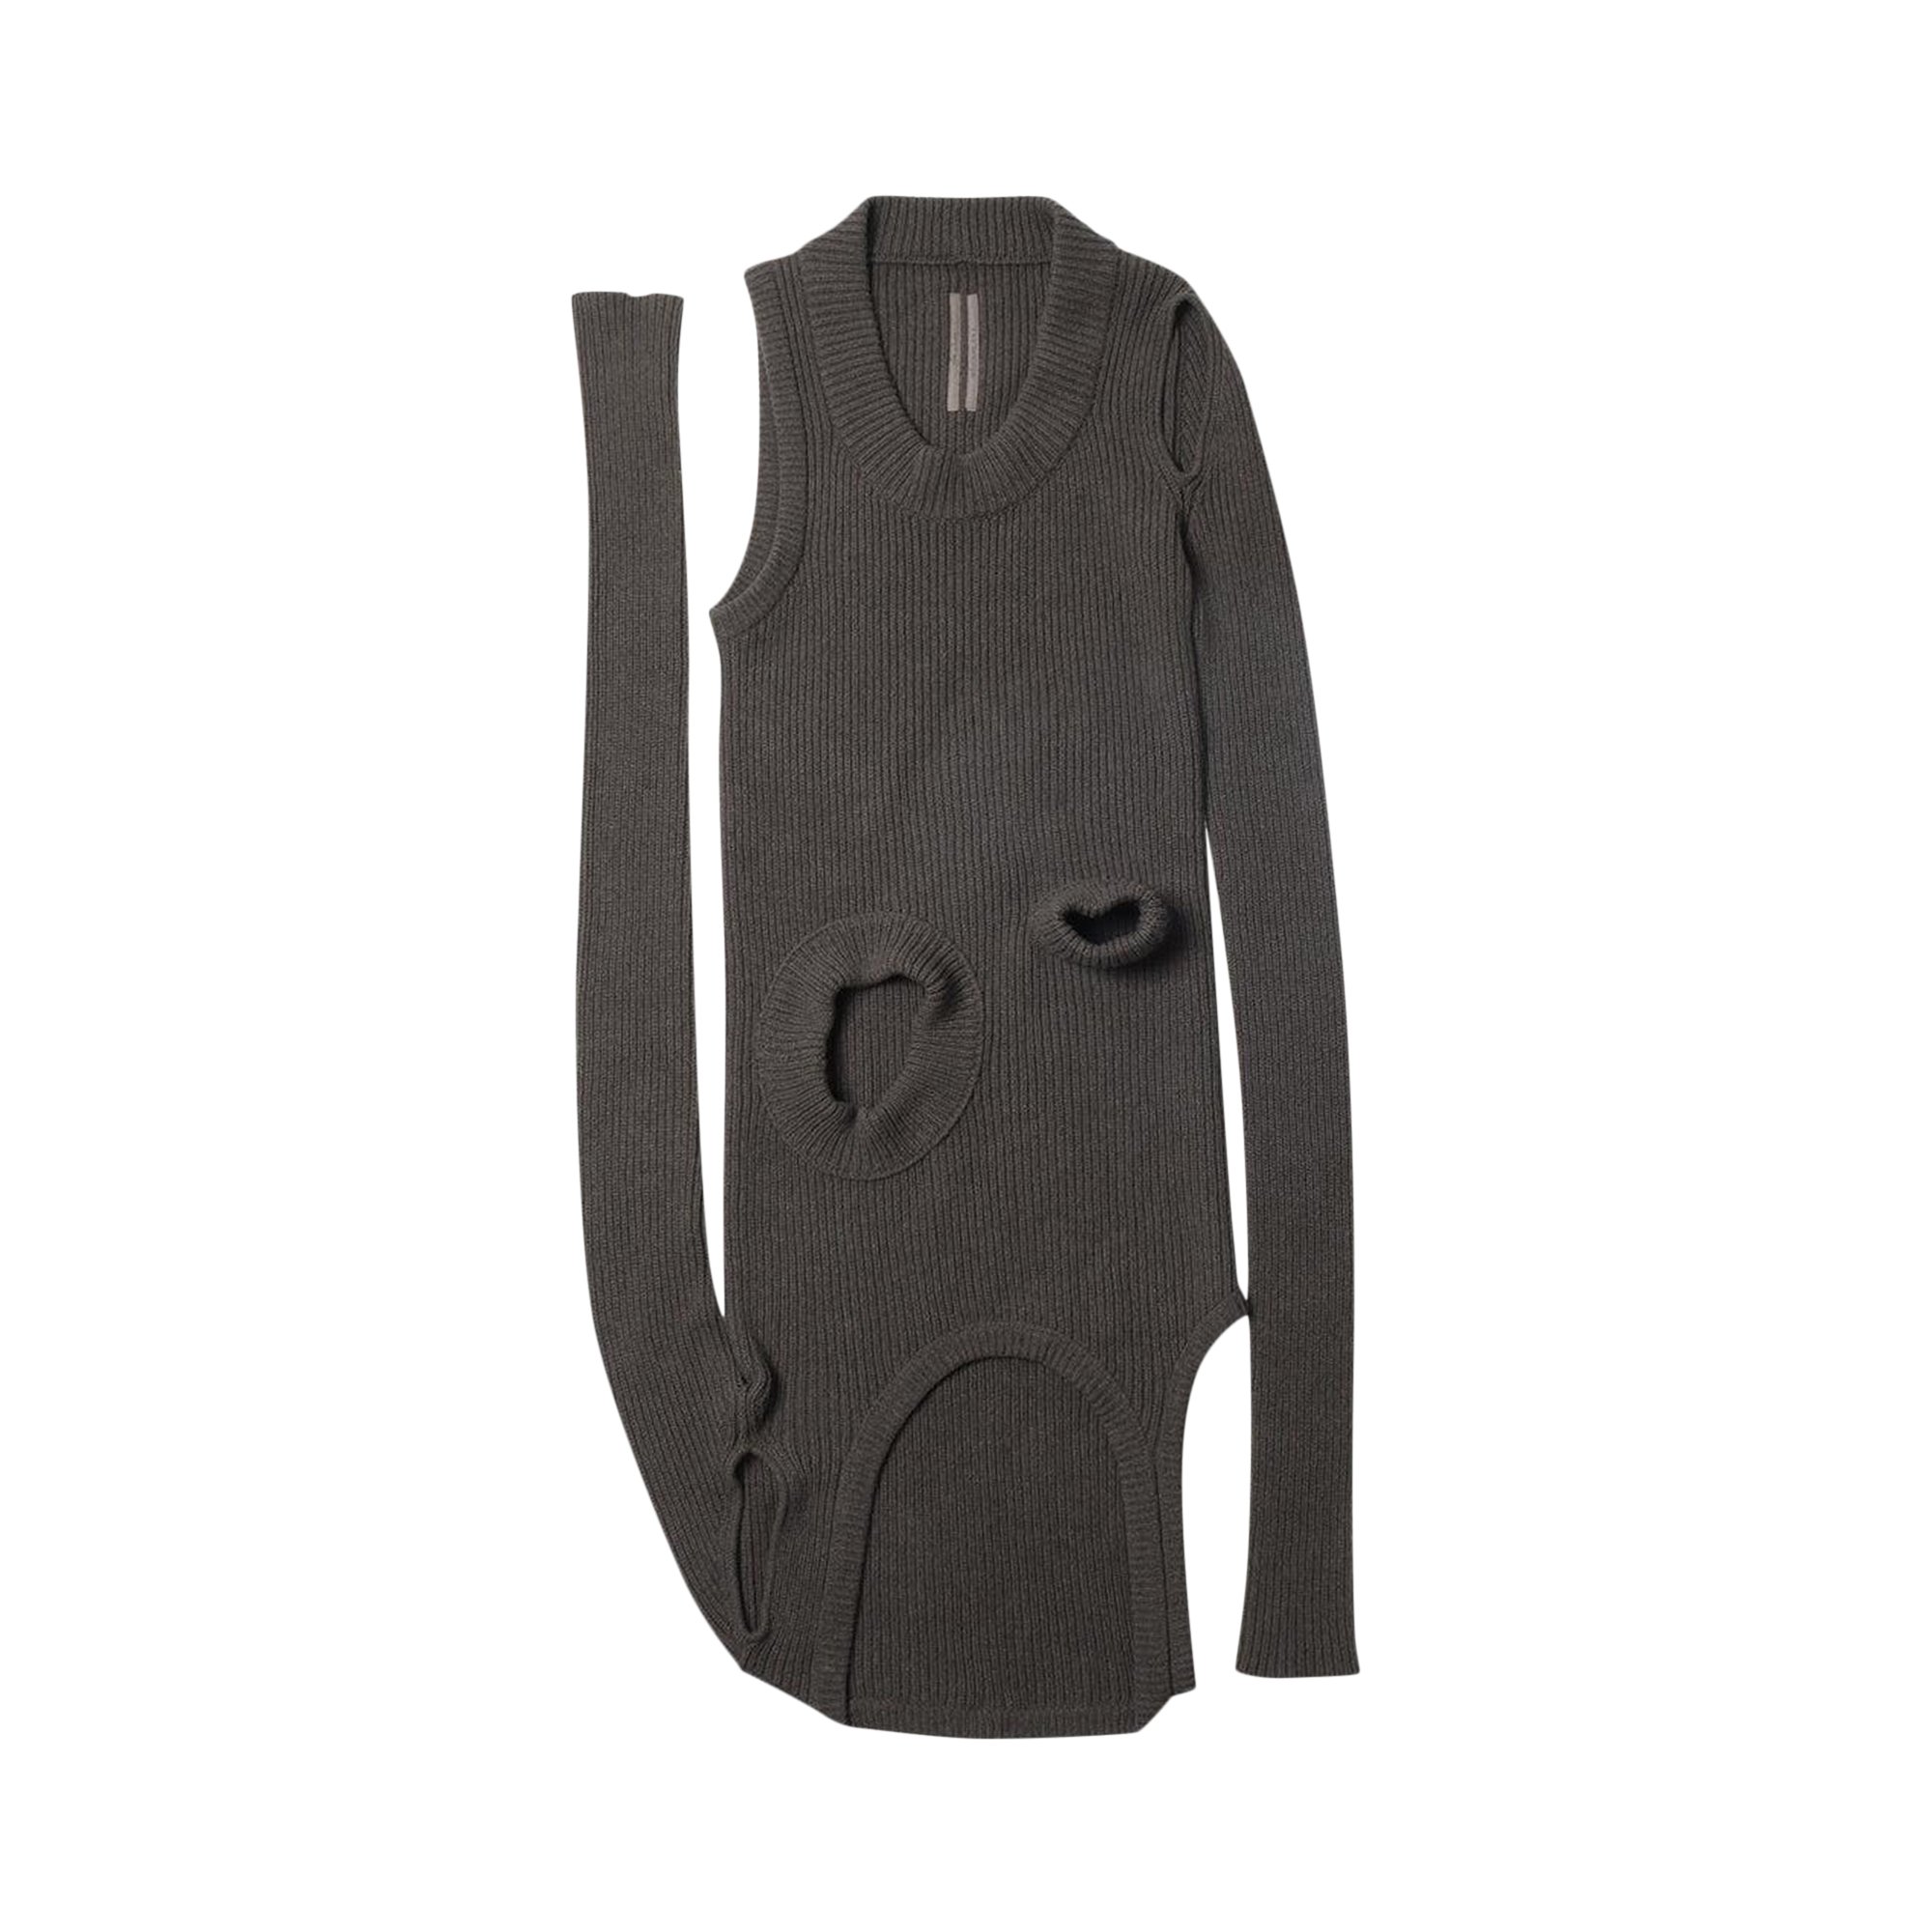 Buy Rick Owens Banana Deconstructed Sweater 'Dust' - RR02A5608 